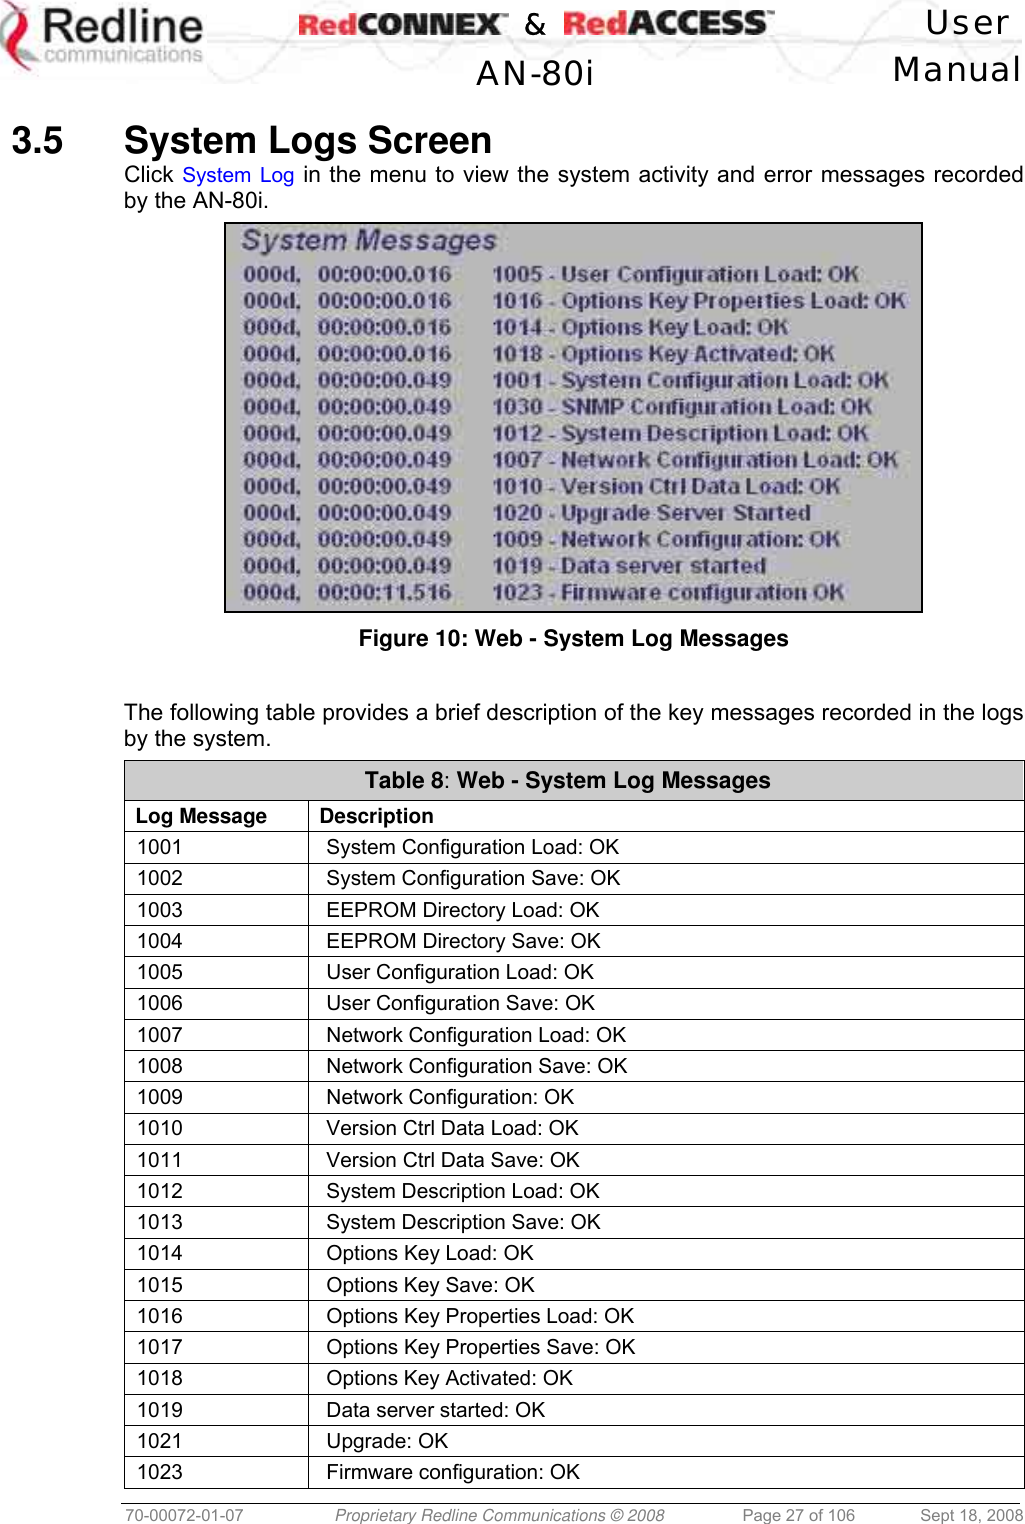    &amp;  User  AN-80i Manual  70-00072-01-07  Proprietary Redline Communications © 2008  Page 27 of 106  Sept 18, 2008  3.5  System Logs Screen Click System Log in the menu to view the system activity and error messages recorded by the AN-80i.  Figure 10: Web - System Log Messages  The following table provides a brief description of the key messages recorded in the logs by the system. Table 8: Web - System Log Messages Log Message  Description 1001    System Configuration Load: OK 1002    System Configuration Save: OK 1003    EEPROM Directory Load: OK 1004    EEPROM Directory Save: OK 1005    User Configuration Load: OK 1006    User Configuration Save: OK 1007    Network Configuration Load: OK 1008    Network Configuration Save: OK 1009    Network Configuration: OK 1010    Version Ctrl Data Load: OK 1011    Version Ctrl Data Save: OK 1012    System Description Load: OK 1013    System Description Save: OK 1014    Options Key Load: OK 1015    Options Key Save: OK 1016    Options Key Properties Load: OK 1017    Options Key Properties Save: OK 1018    Options Key Activated: OK 1019    Data server started: OK 1021    Upgrade: OK 1023    Firmware configuration: OK 